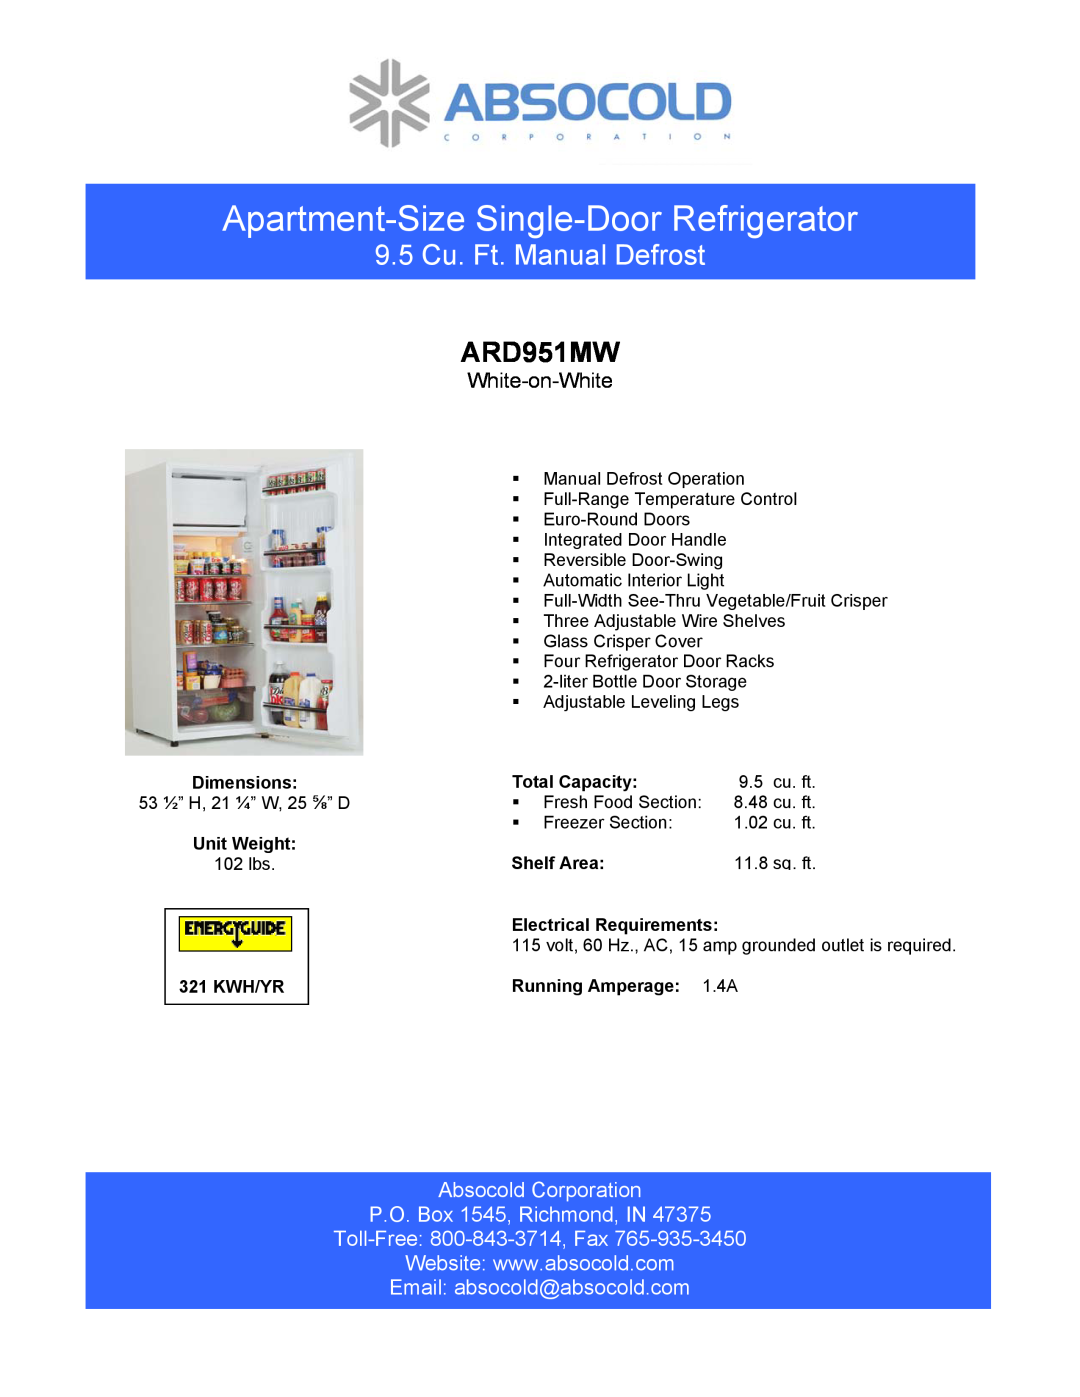 Absocold Corp ARD951MW dimensions Apartment-Size Single-DoorRefrigerator, 9.5 Cu. Ft. Manual Defrost, White-on-White 